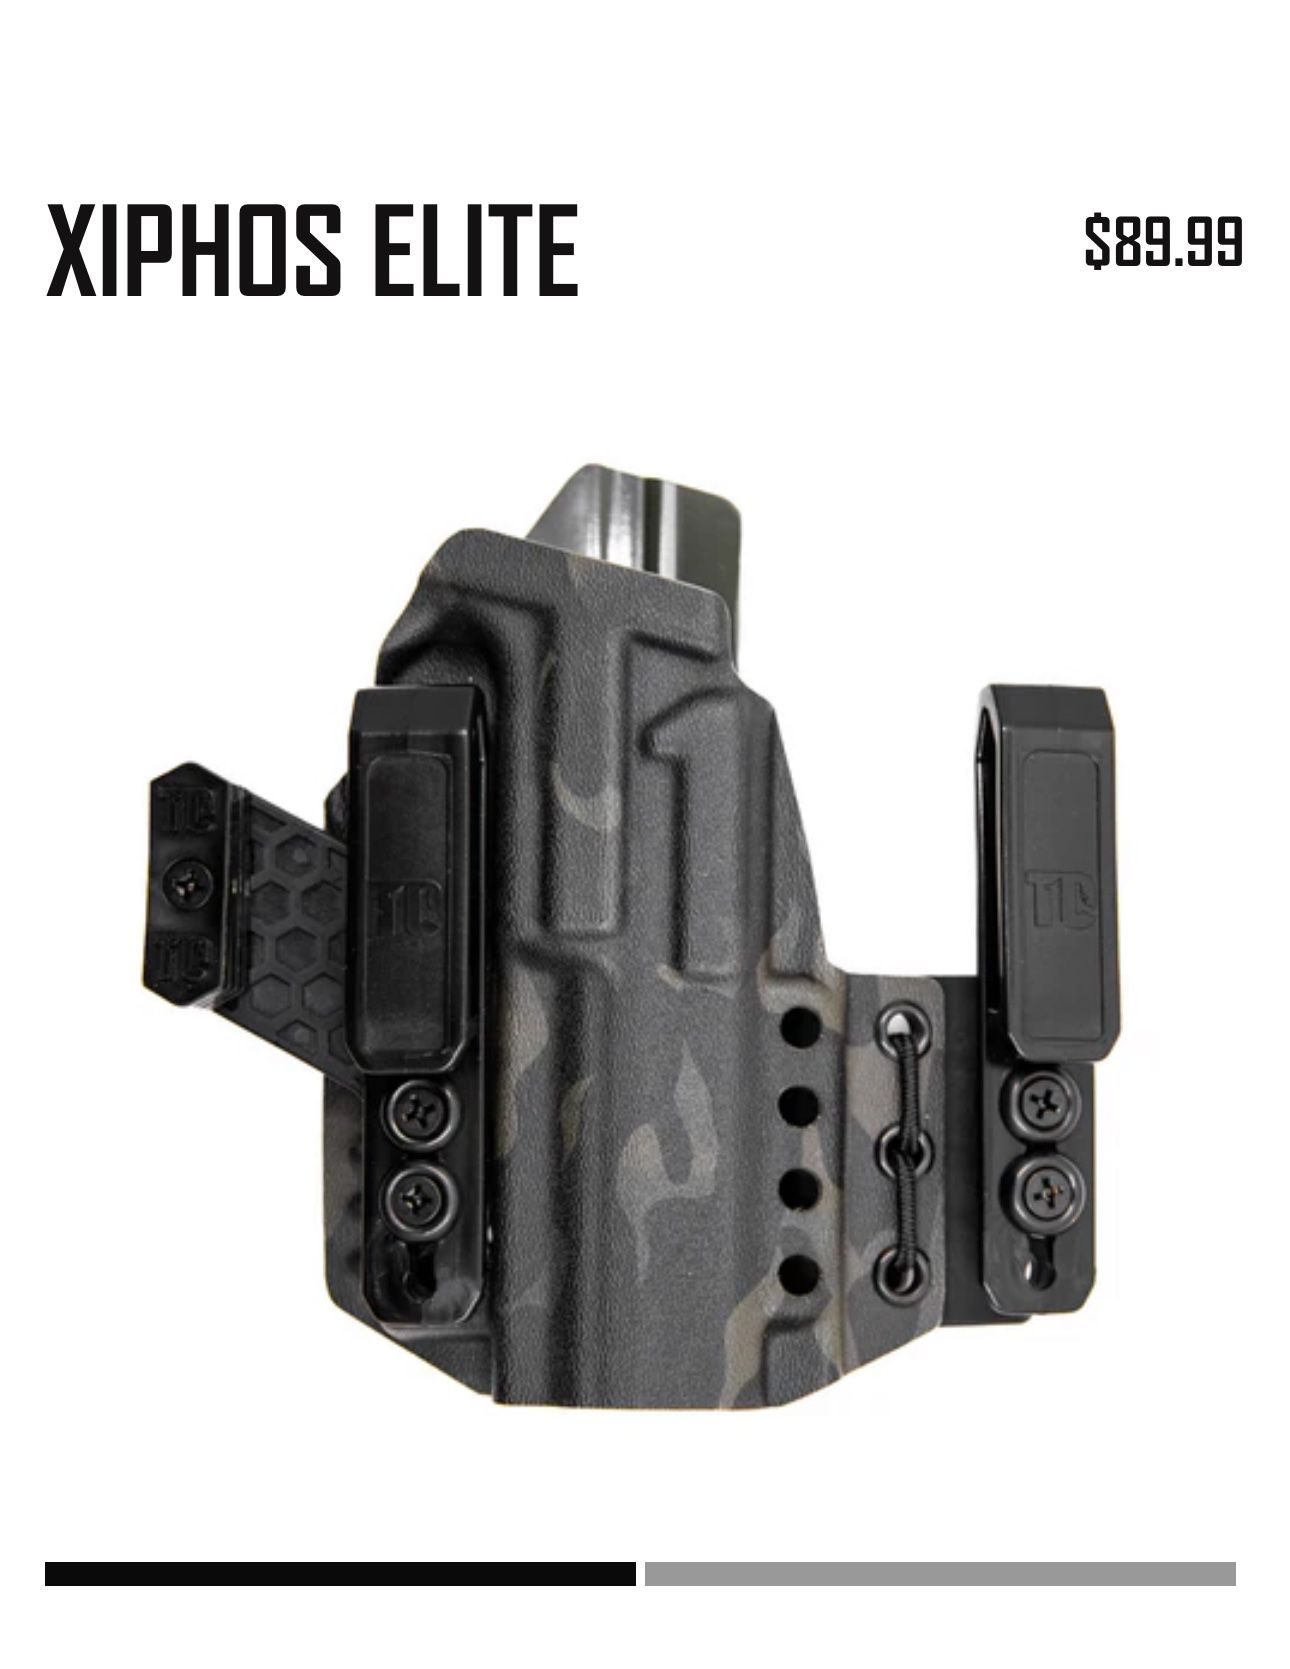 Conceal Tier 1 Holster 